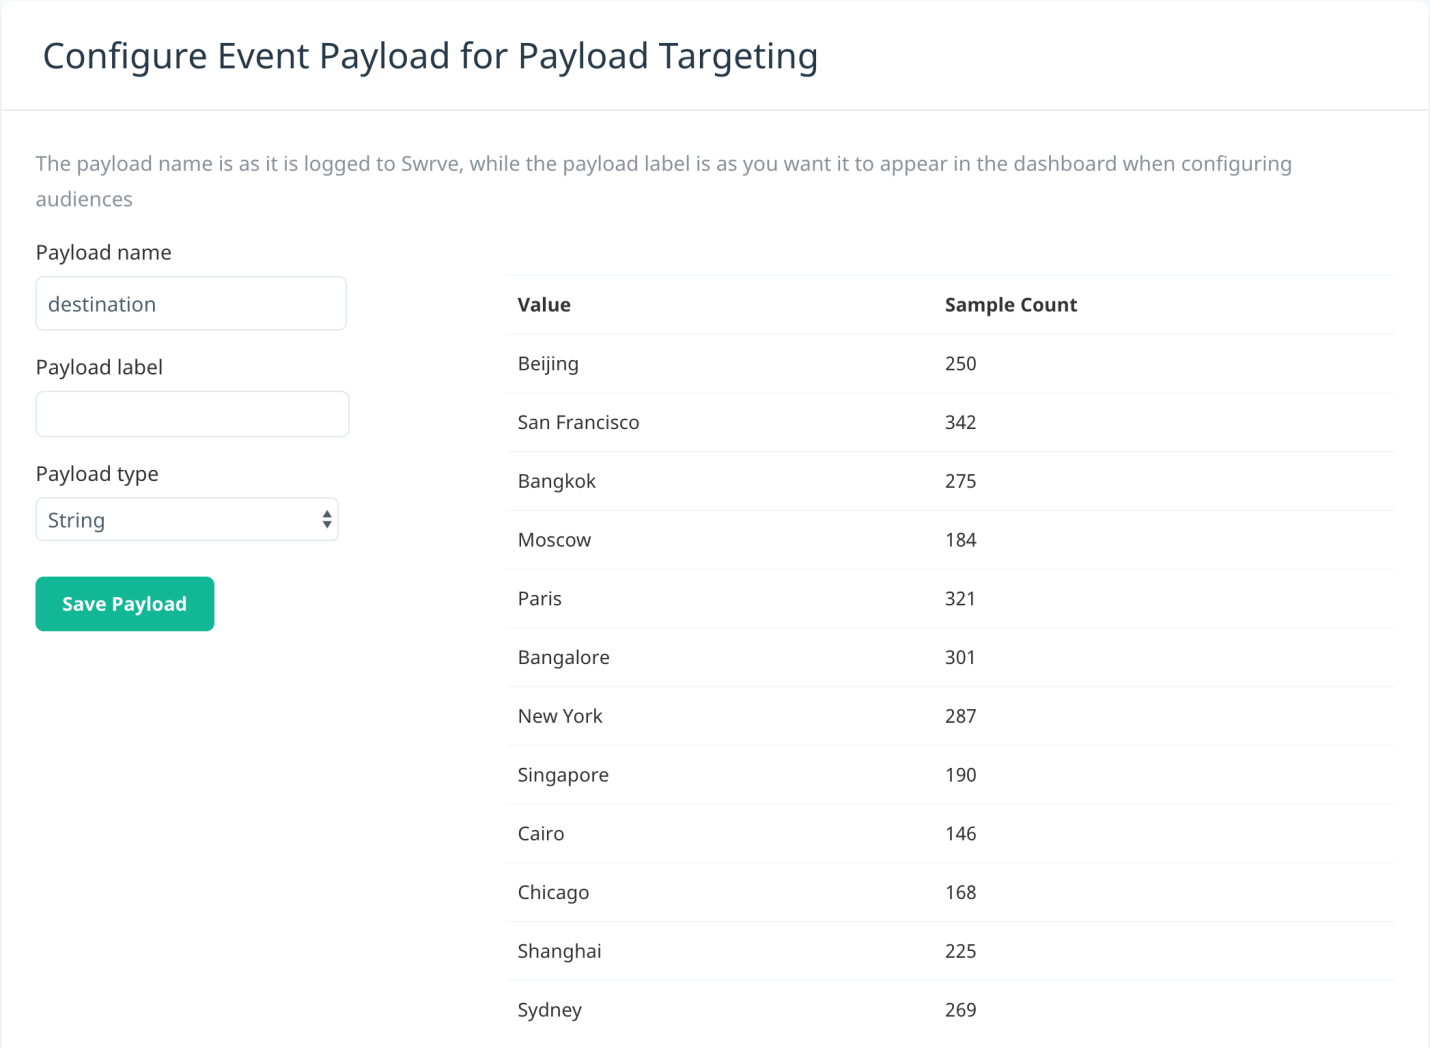 Configuring event payloads